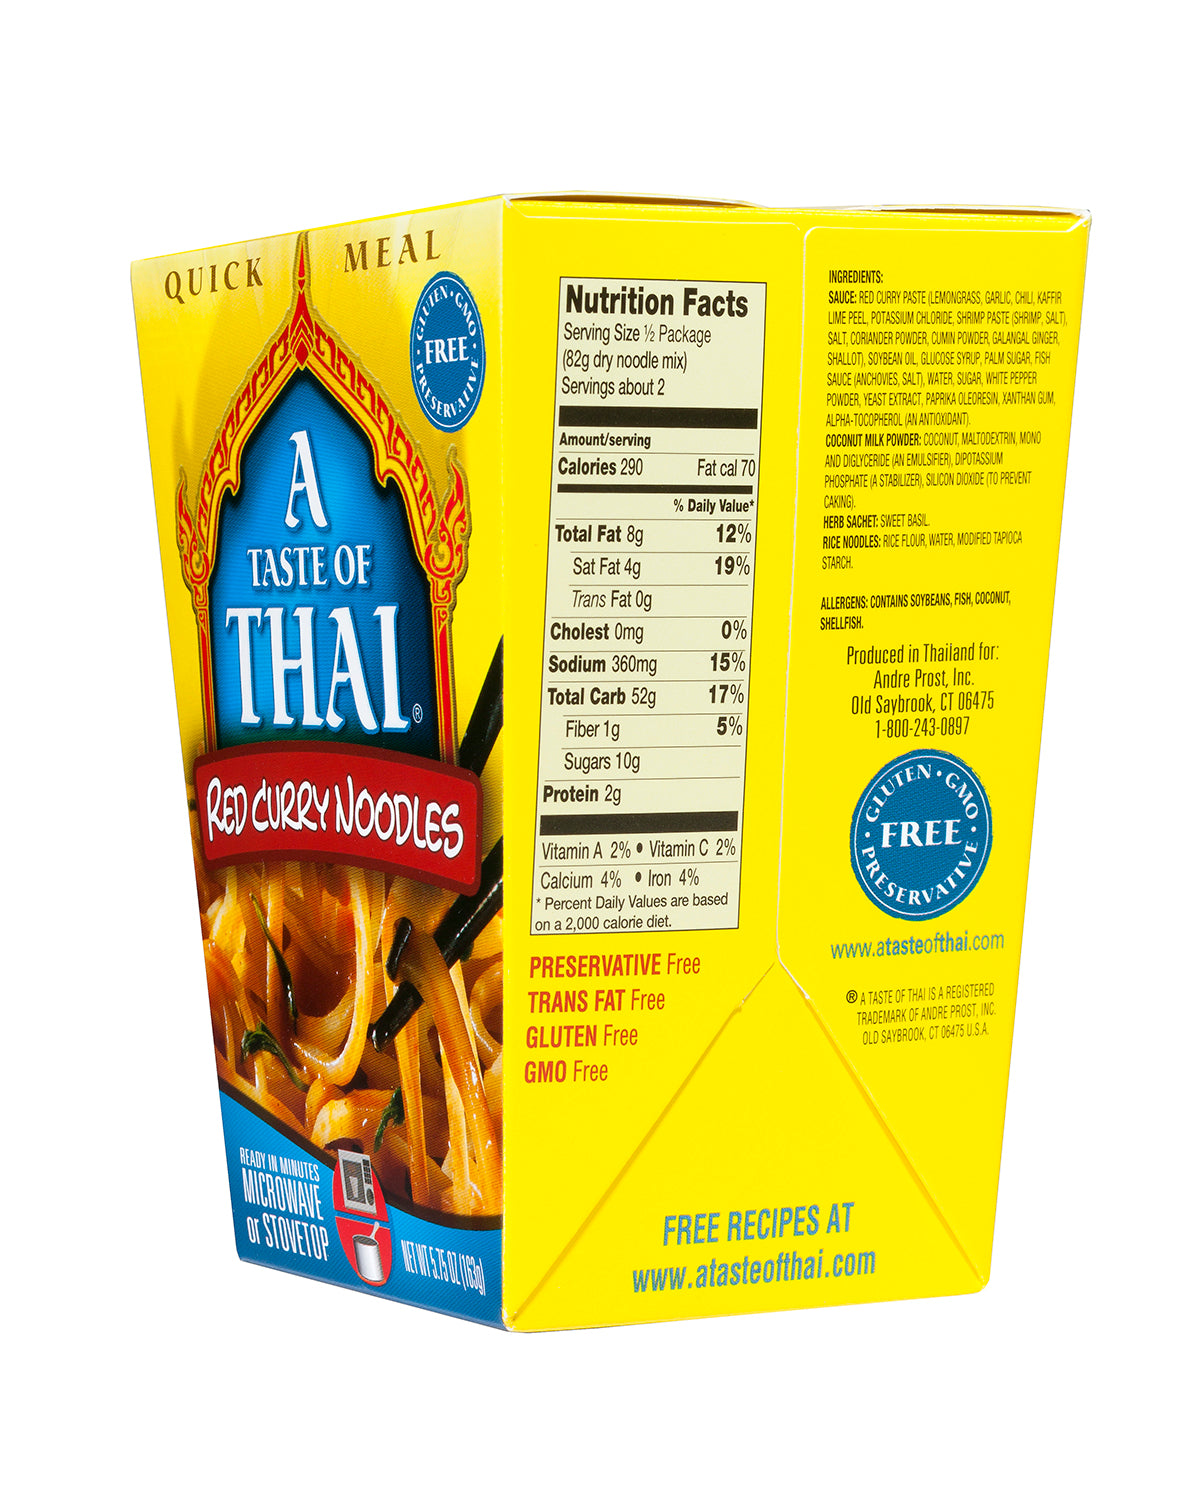 A Taste Of Thai - Red Curry Noodles Quick Meal / 6 Pack